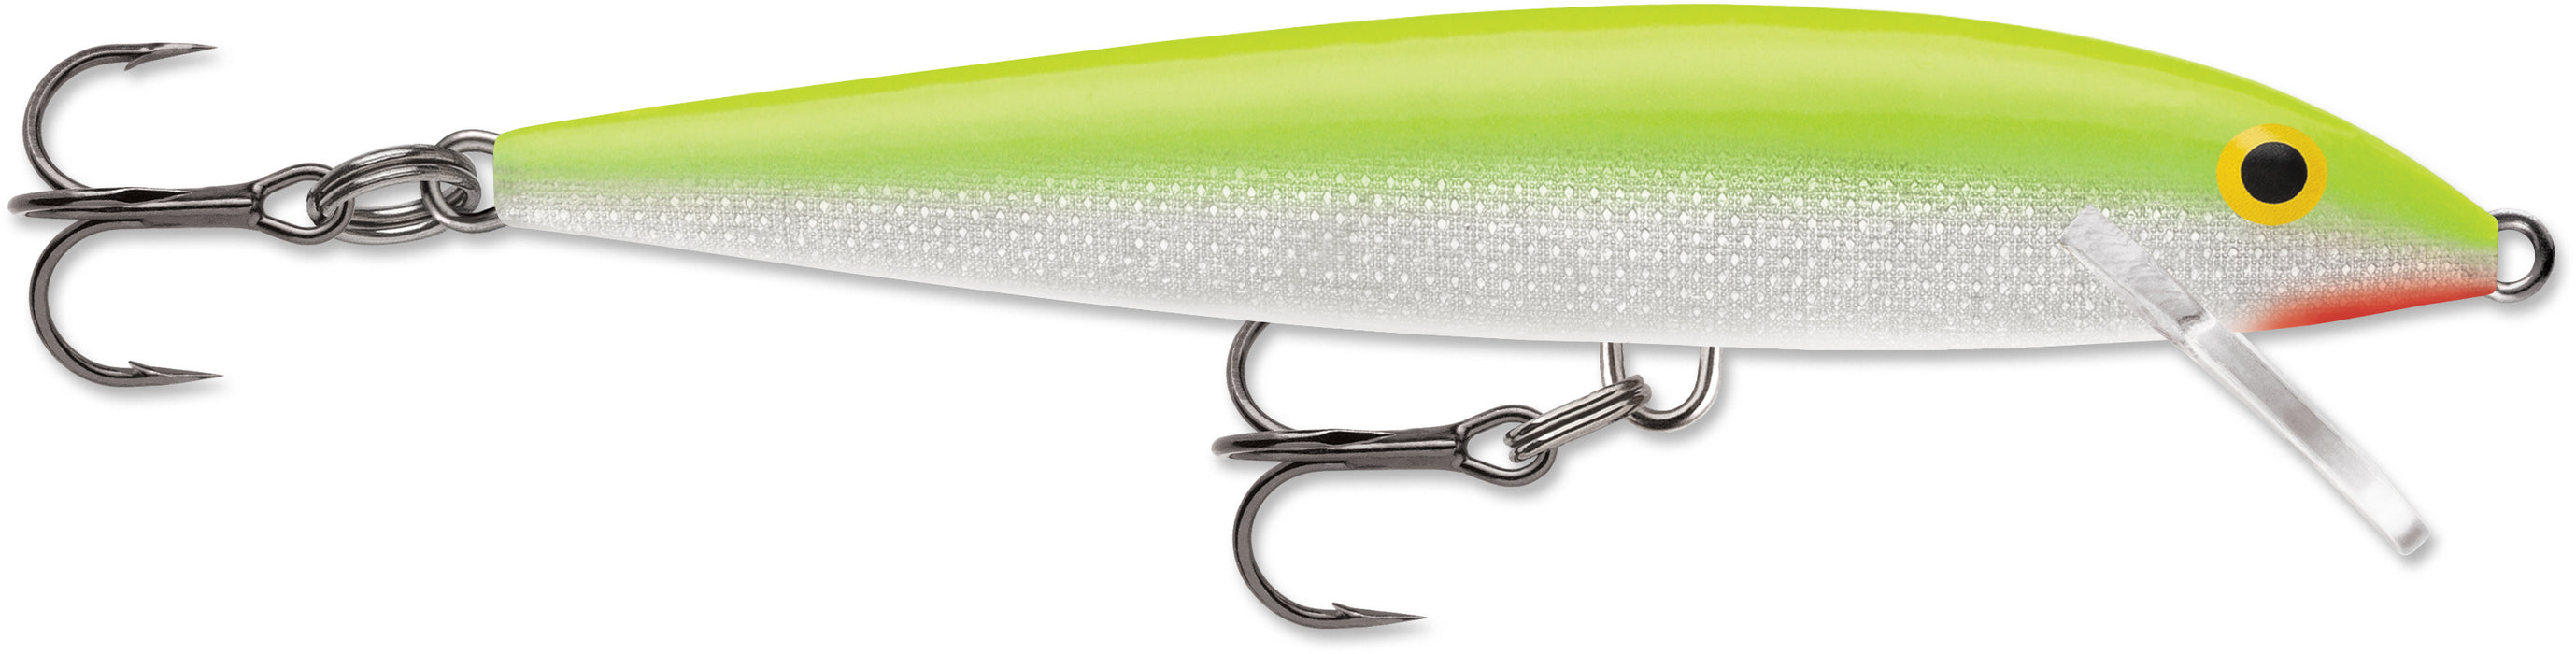 Rapala 09 Original Floater Fishing Lures, 3.5-Inch, Perch